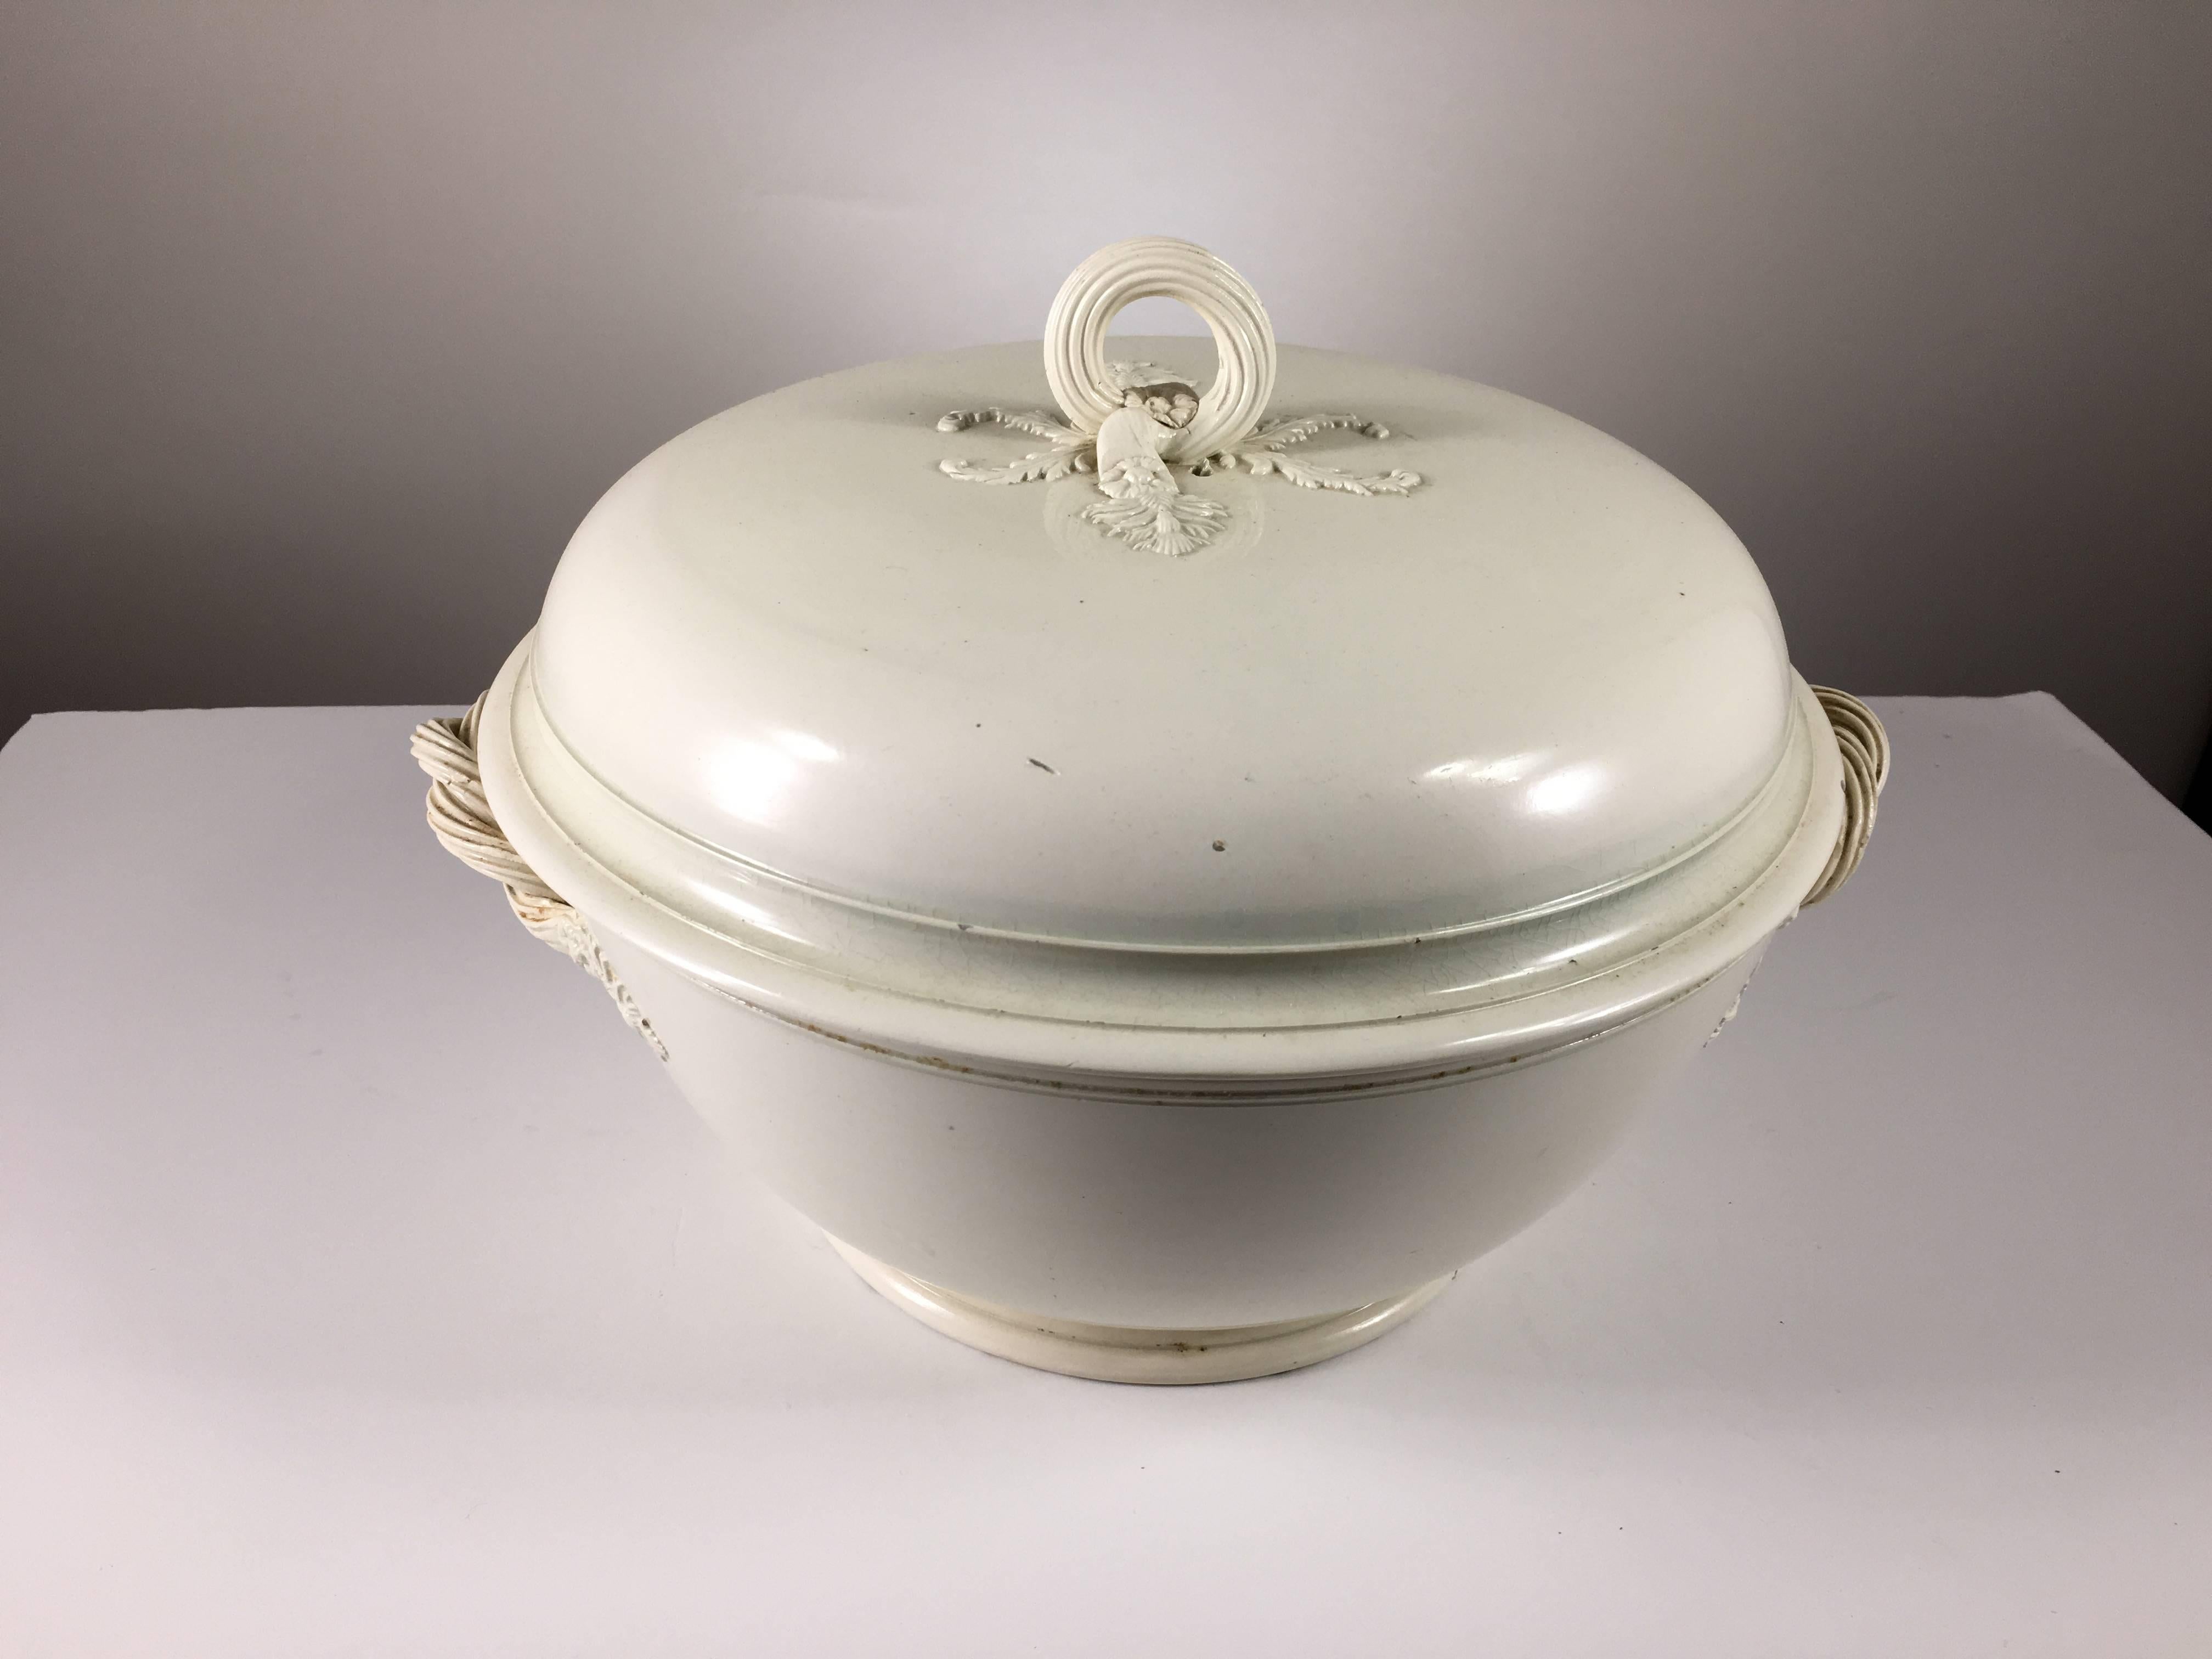 A lovely cream-ware tureen with lid with finely molded "rope" handles, large size, probably early Wedgewood or Leeds.